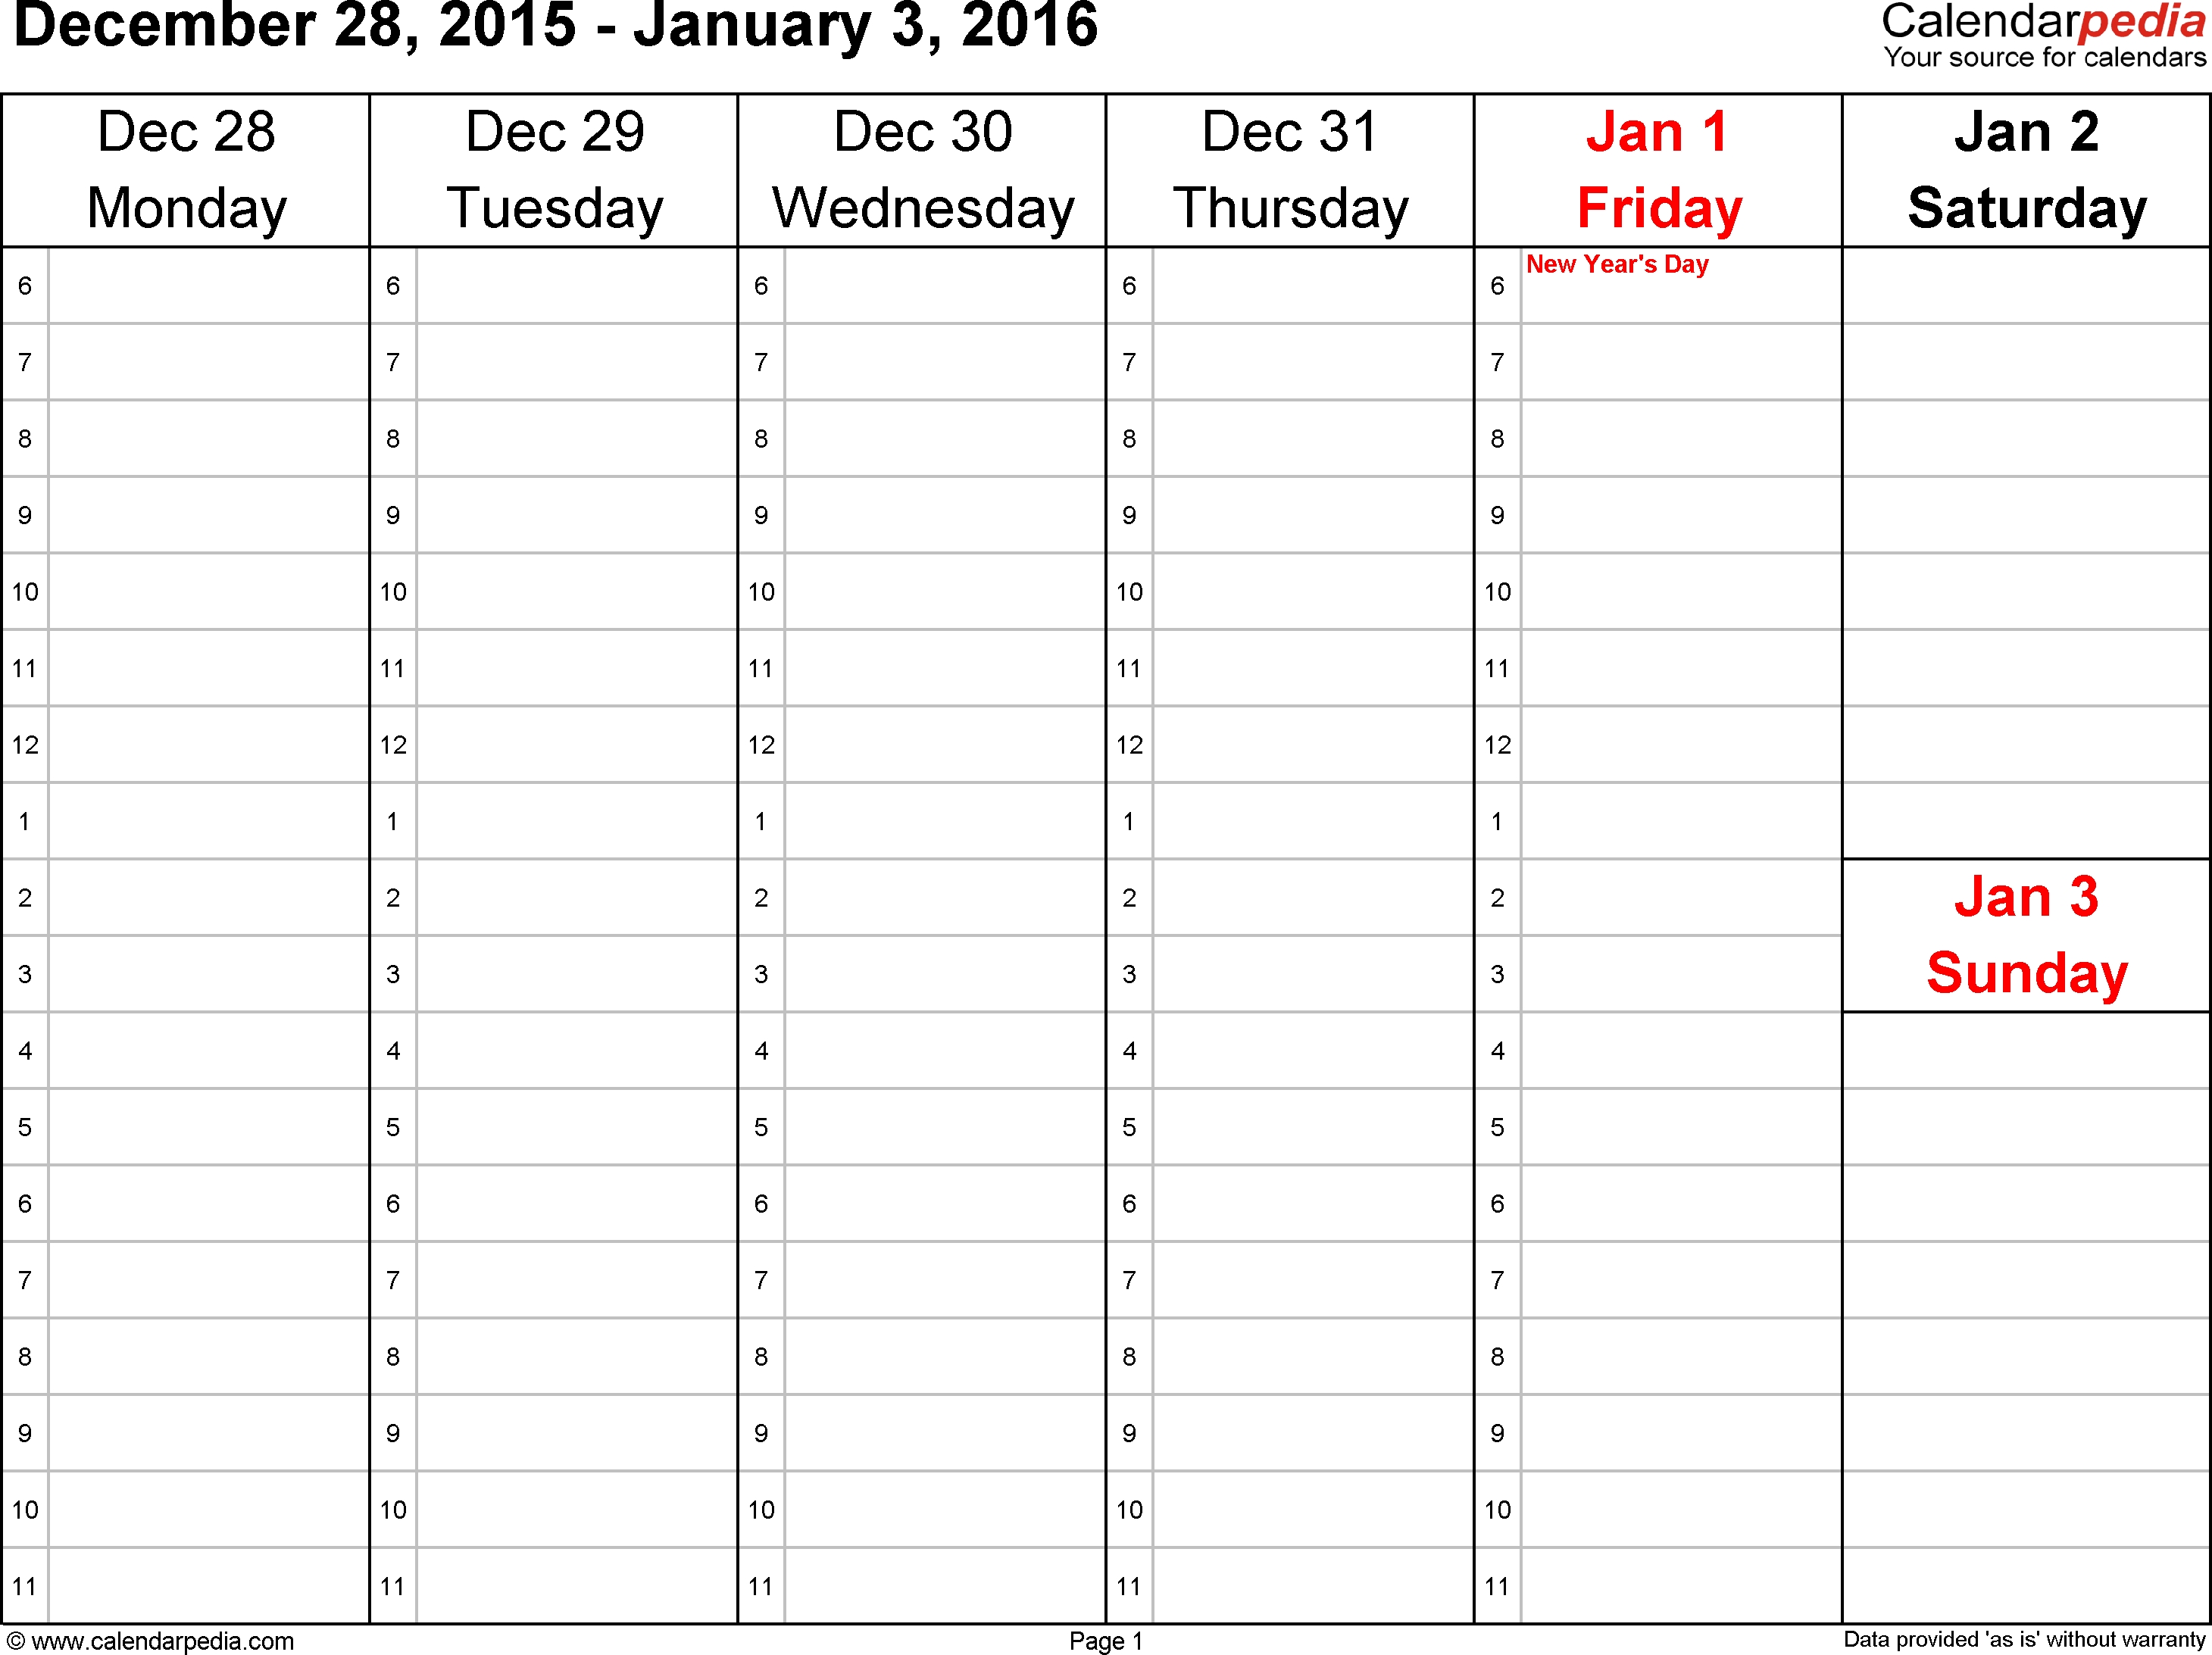 Weekly Calendar 2016 For Excel - 12 Free Printable Templates-Excel Calendar Template 8.5 X 11